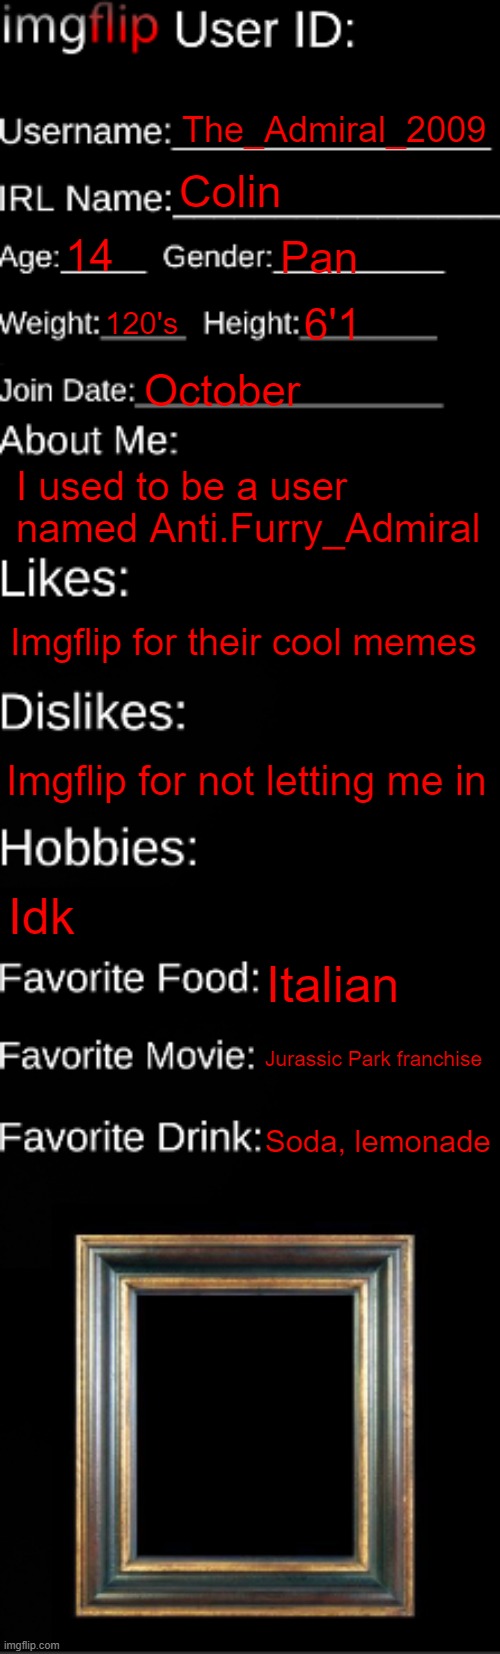 Imgflip, pls spare my ass | The_Admiral_2009; Colin; 14; Pan; 120's; 6'1; October; I used to be a user named Anti.Furry_Admiral; Imgflip for their cool memes; Imgflip for not letting me in; Idk; Italian; Jurassic Park franchise; Soda, lemonade | image tagged in imgflip id card,please,help me | made w/ Imgflip meme maker